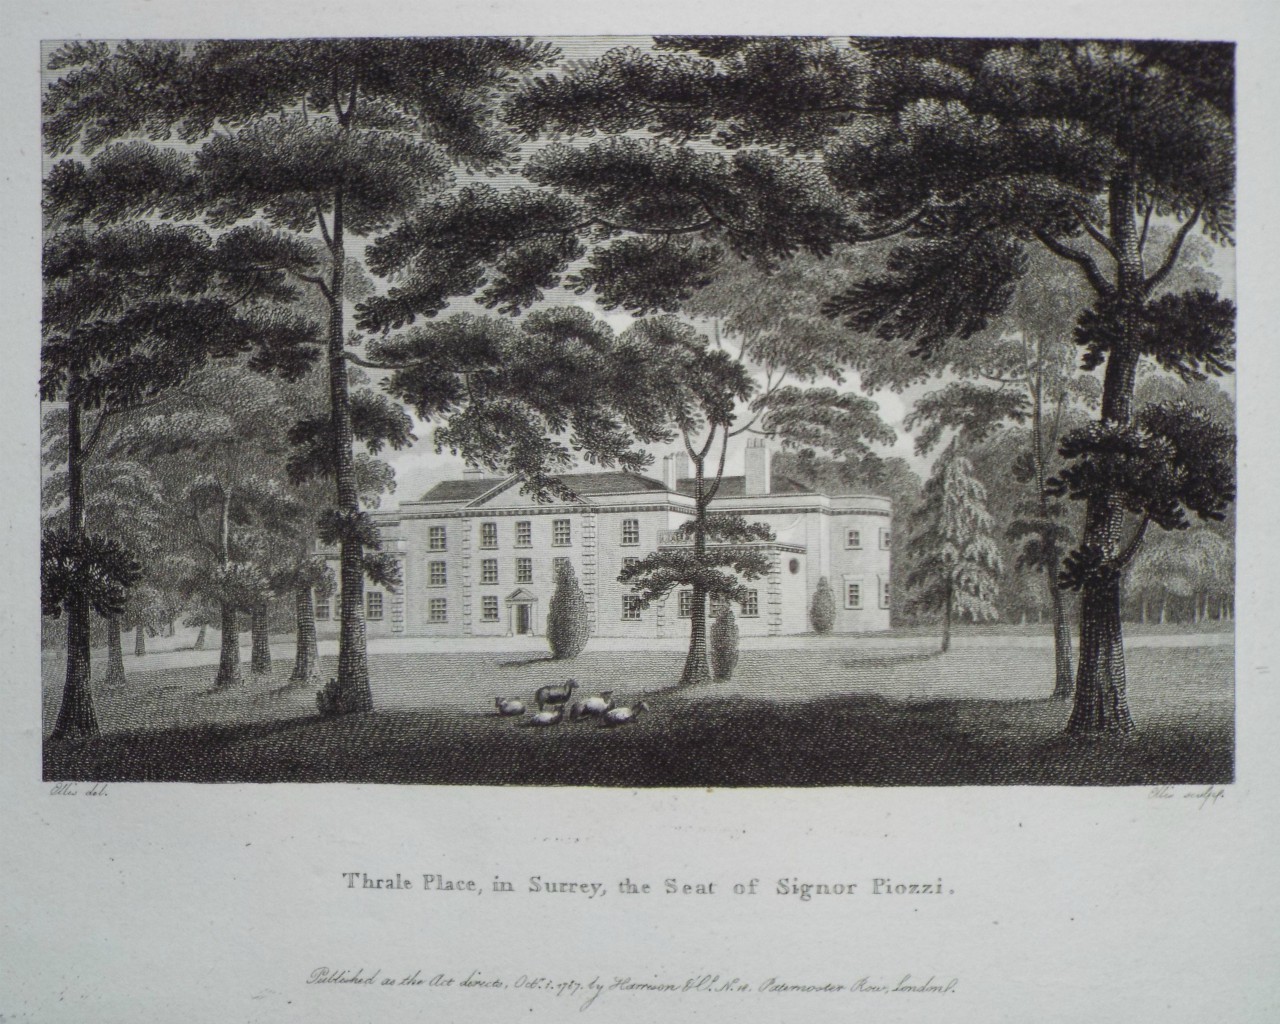 Print - Thrale Place, in Surrey, the Seat of Signor Piozzi. - 